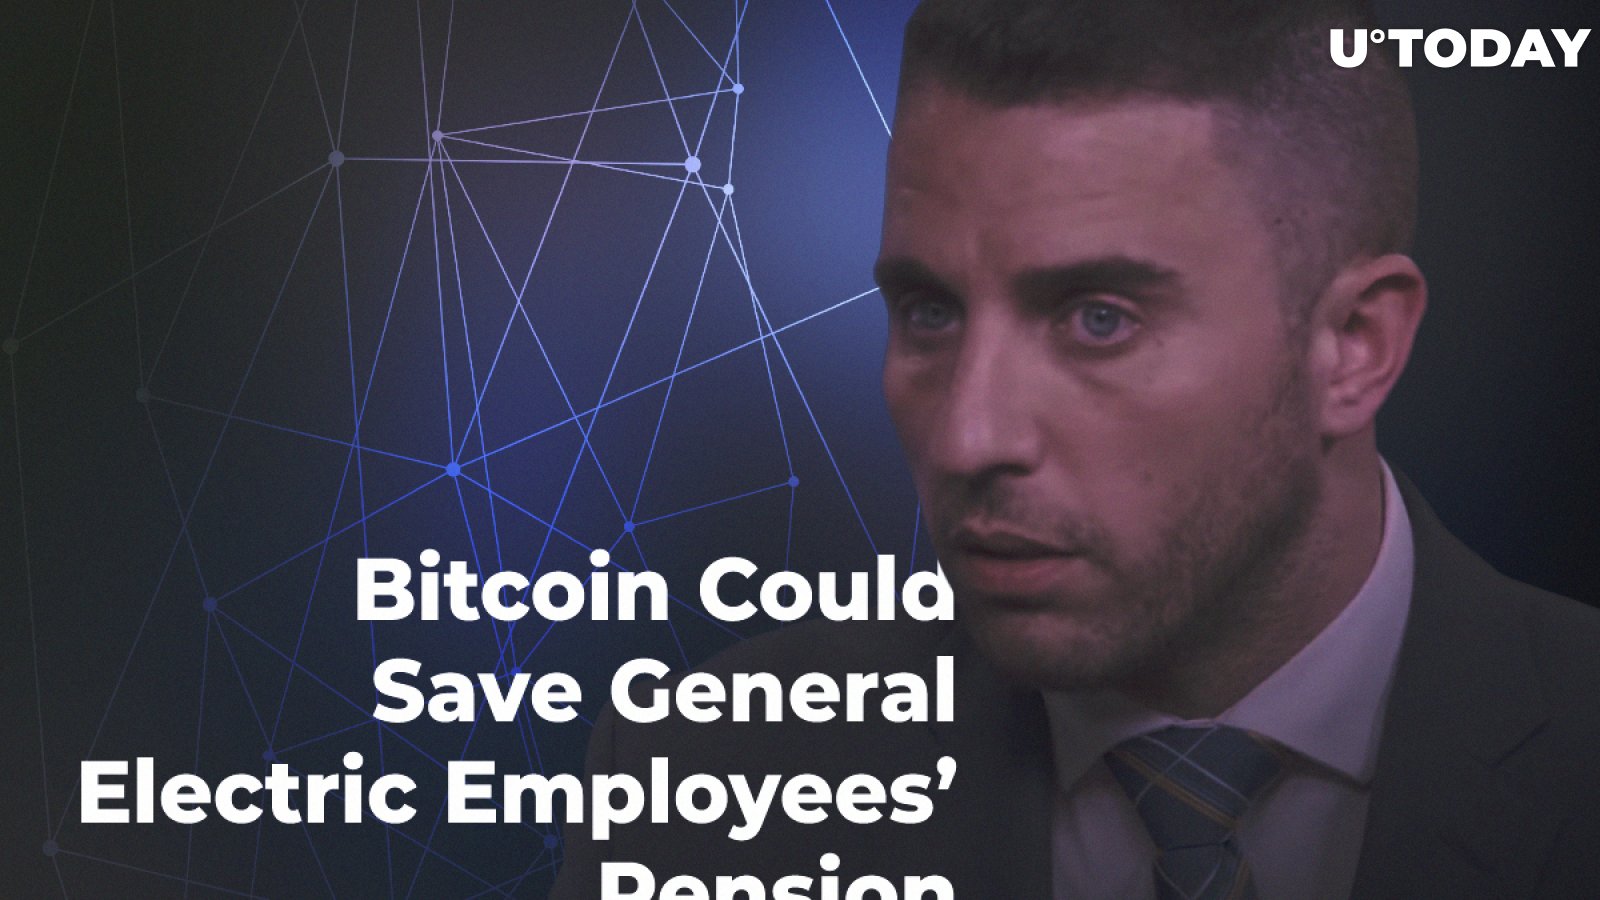 Bitcoin Bull Anthony Pompliano Says BTC Could Save General Electric Employees’ Pension 